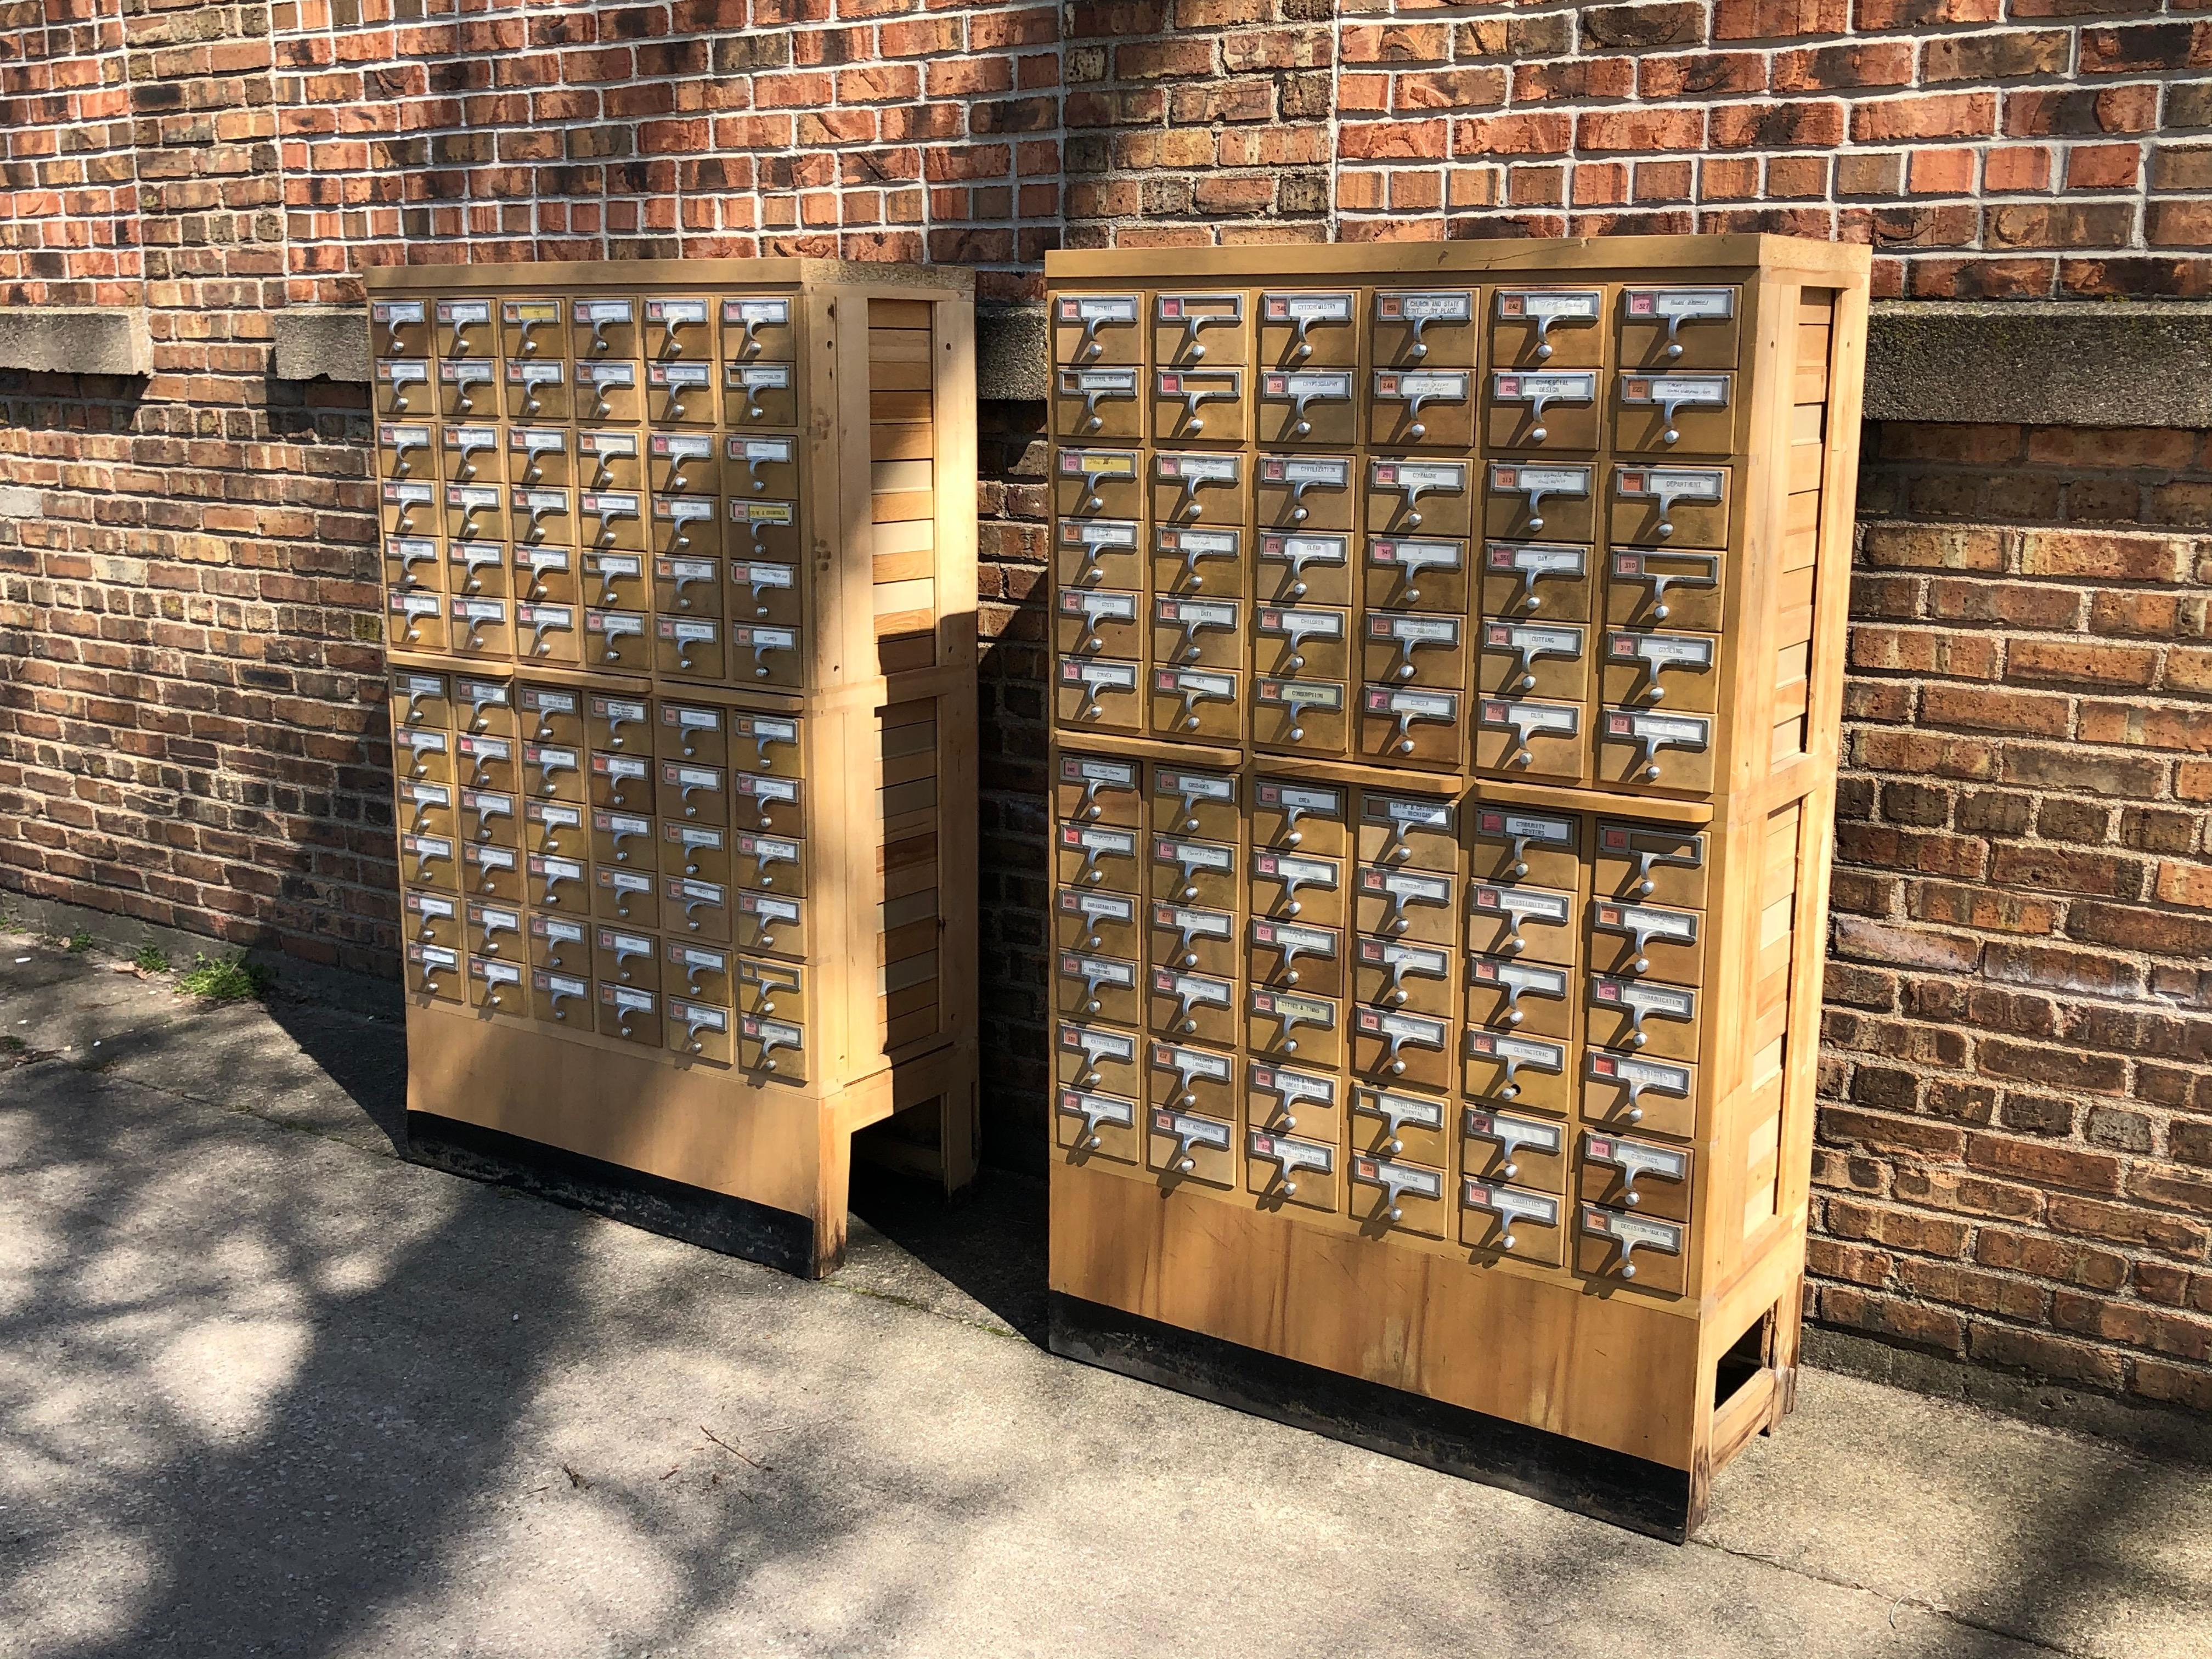 A rare midcentury library card catalog cabinet procured from the library at Western Michigan University. The card catalog features beautiful wood grain and an amazing 72 dovetailed drawers. All of the drawers slide well, and they have adjustable